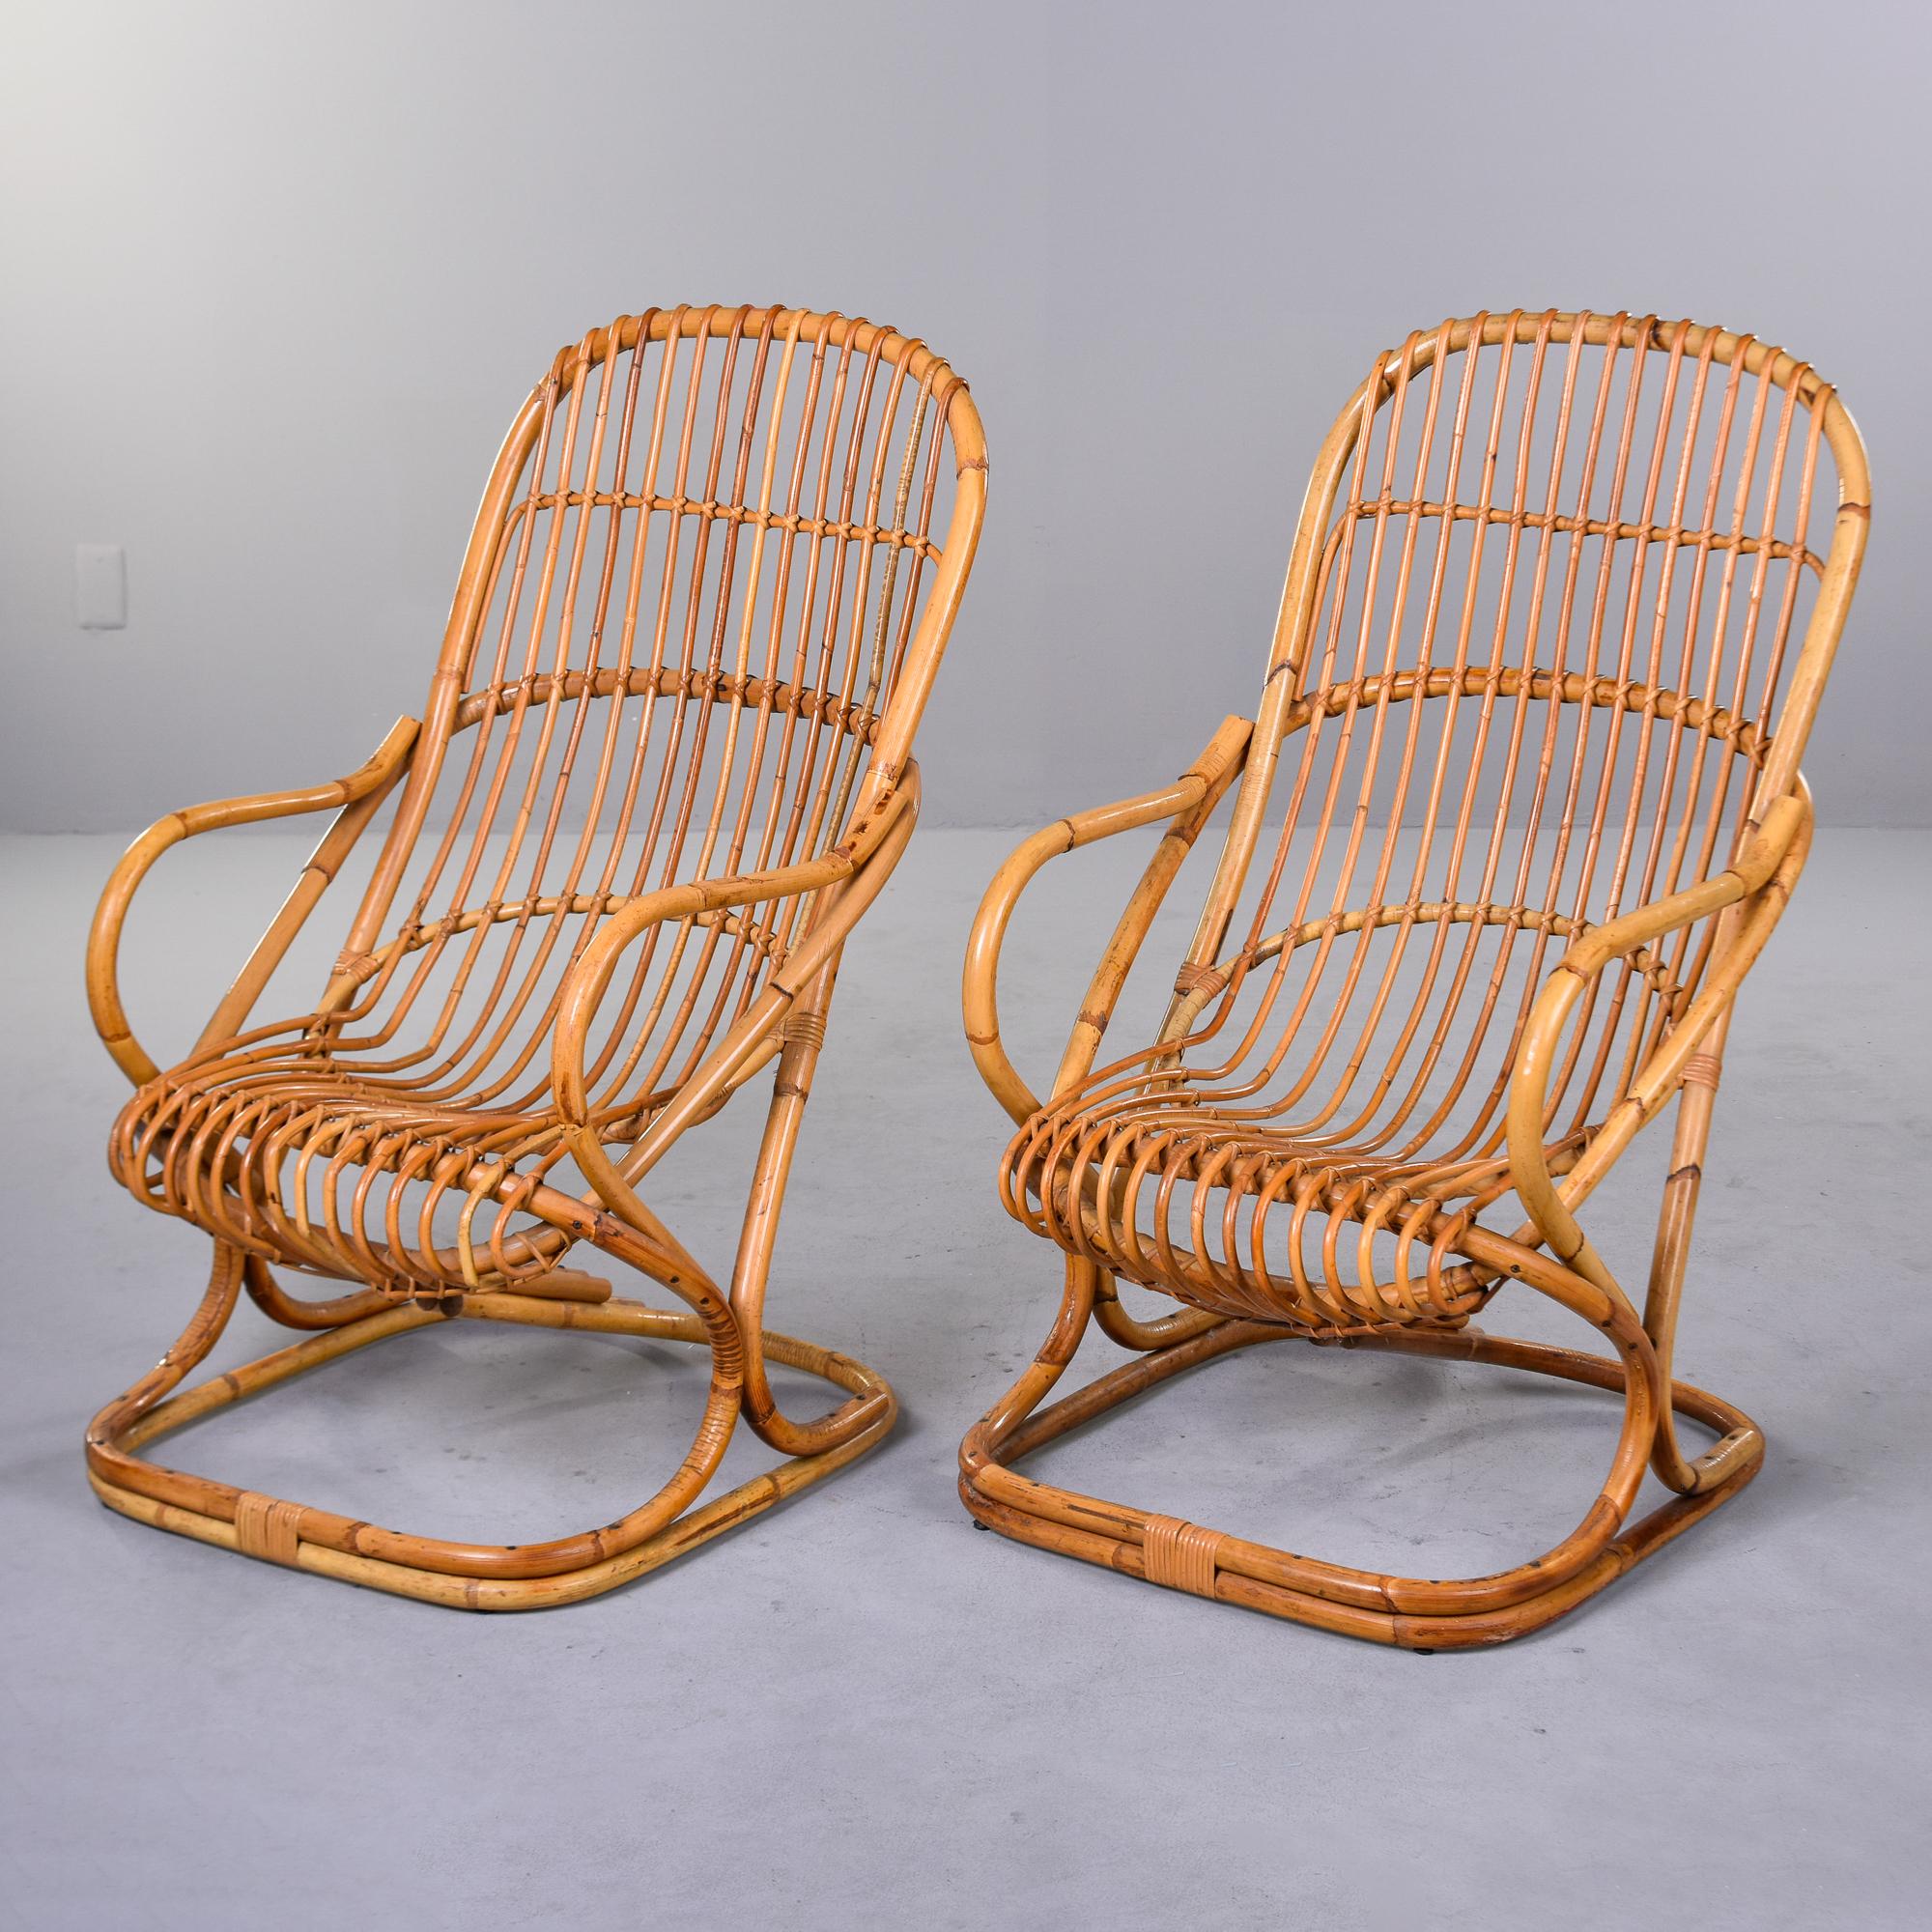 Found in Italy, this pair of rattan armchairs were designed by Tito Agnoli in 1959. Rectangular base with scoop-form seats and curvy arms, these chairs work with or without cushions. No cushions found with this pair. Very good vintage condition with